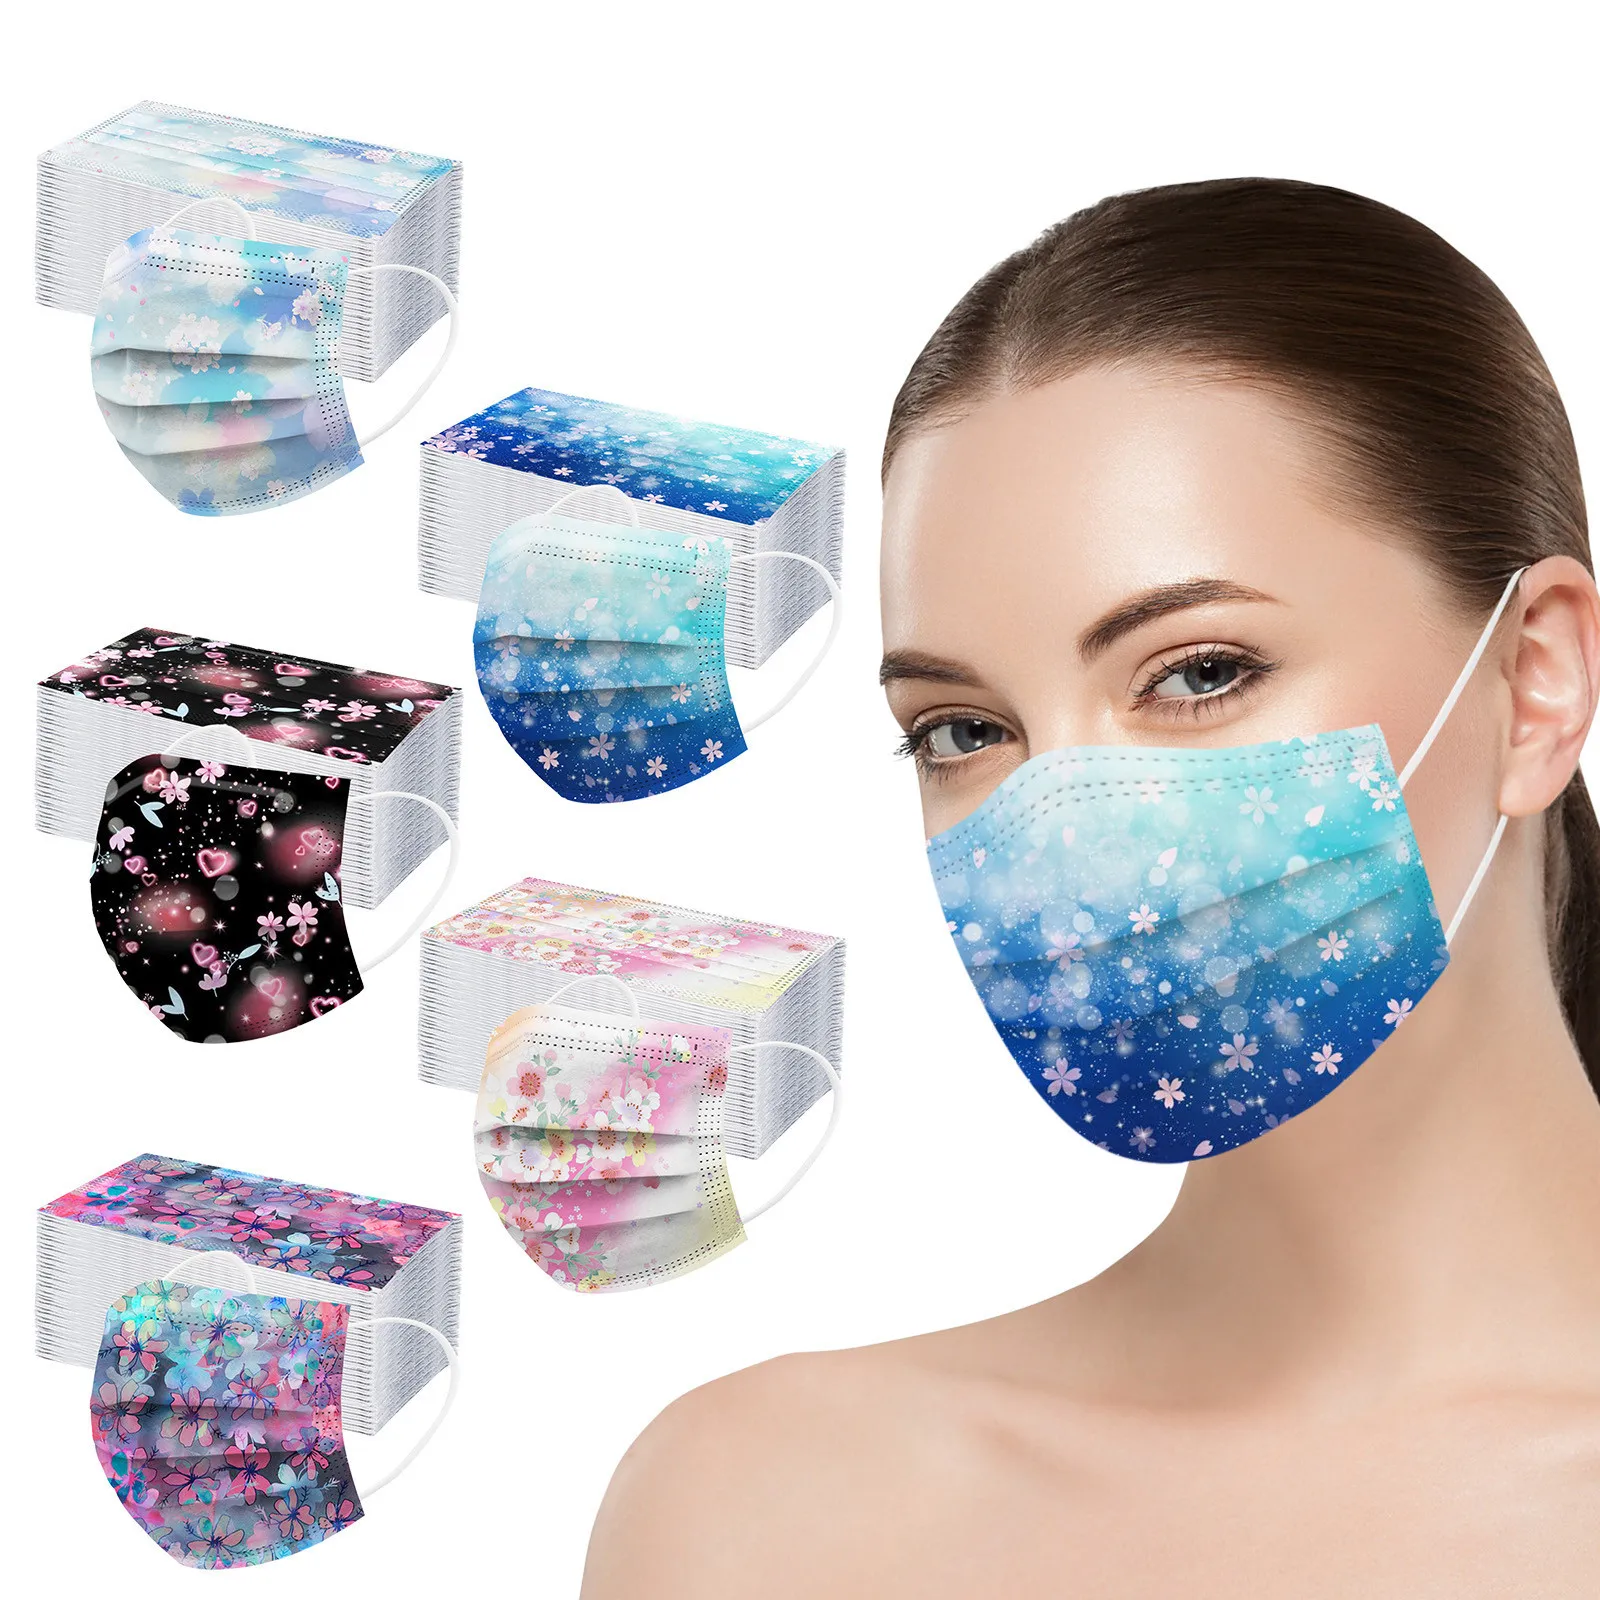 50pcs Adult Mask Snowflake Three-layer Disposable Dust-proof Protective Facemask Flowers Print Non Woven Mouth Cover Halloween halloween outfits